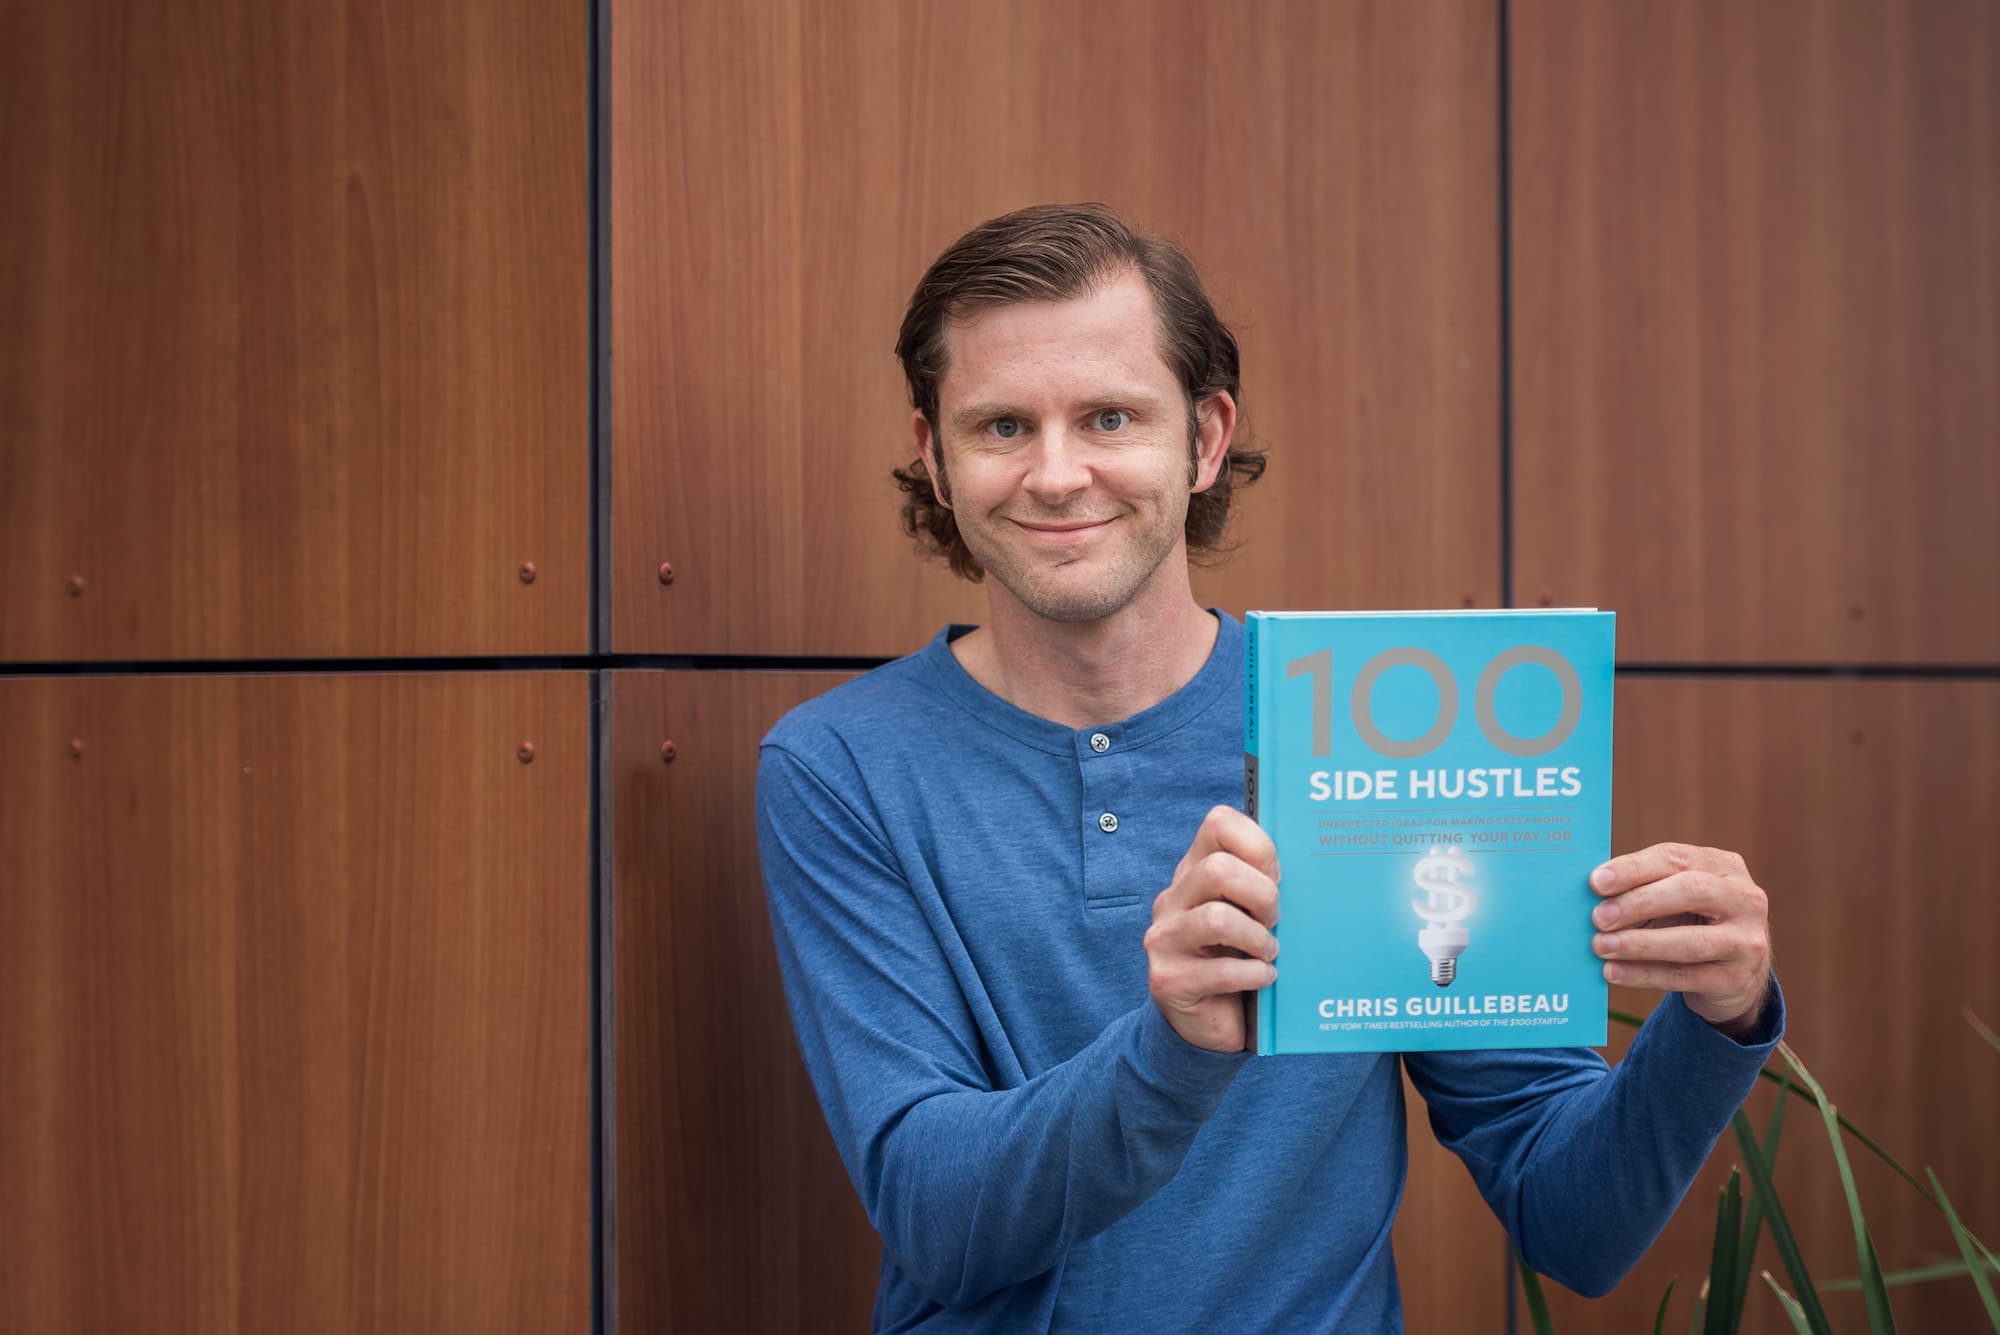 Chris Guillebeau with his book 100 Side Hustles